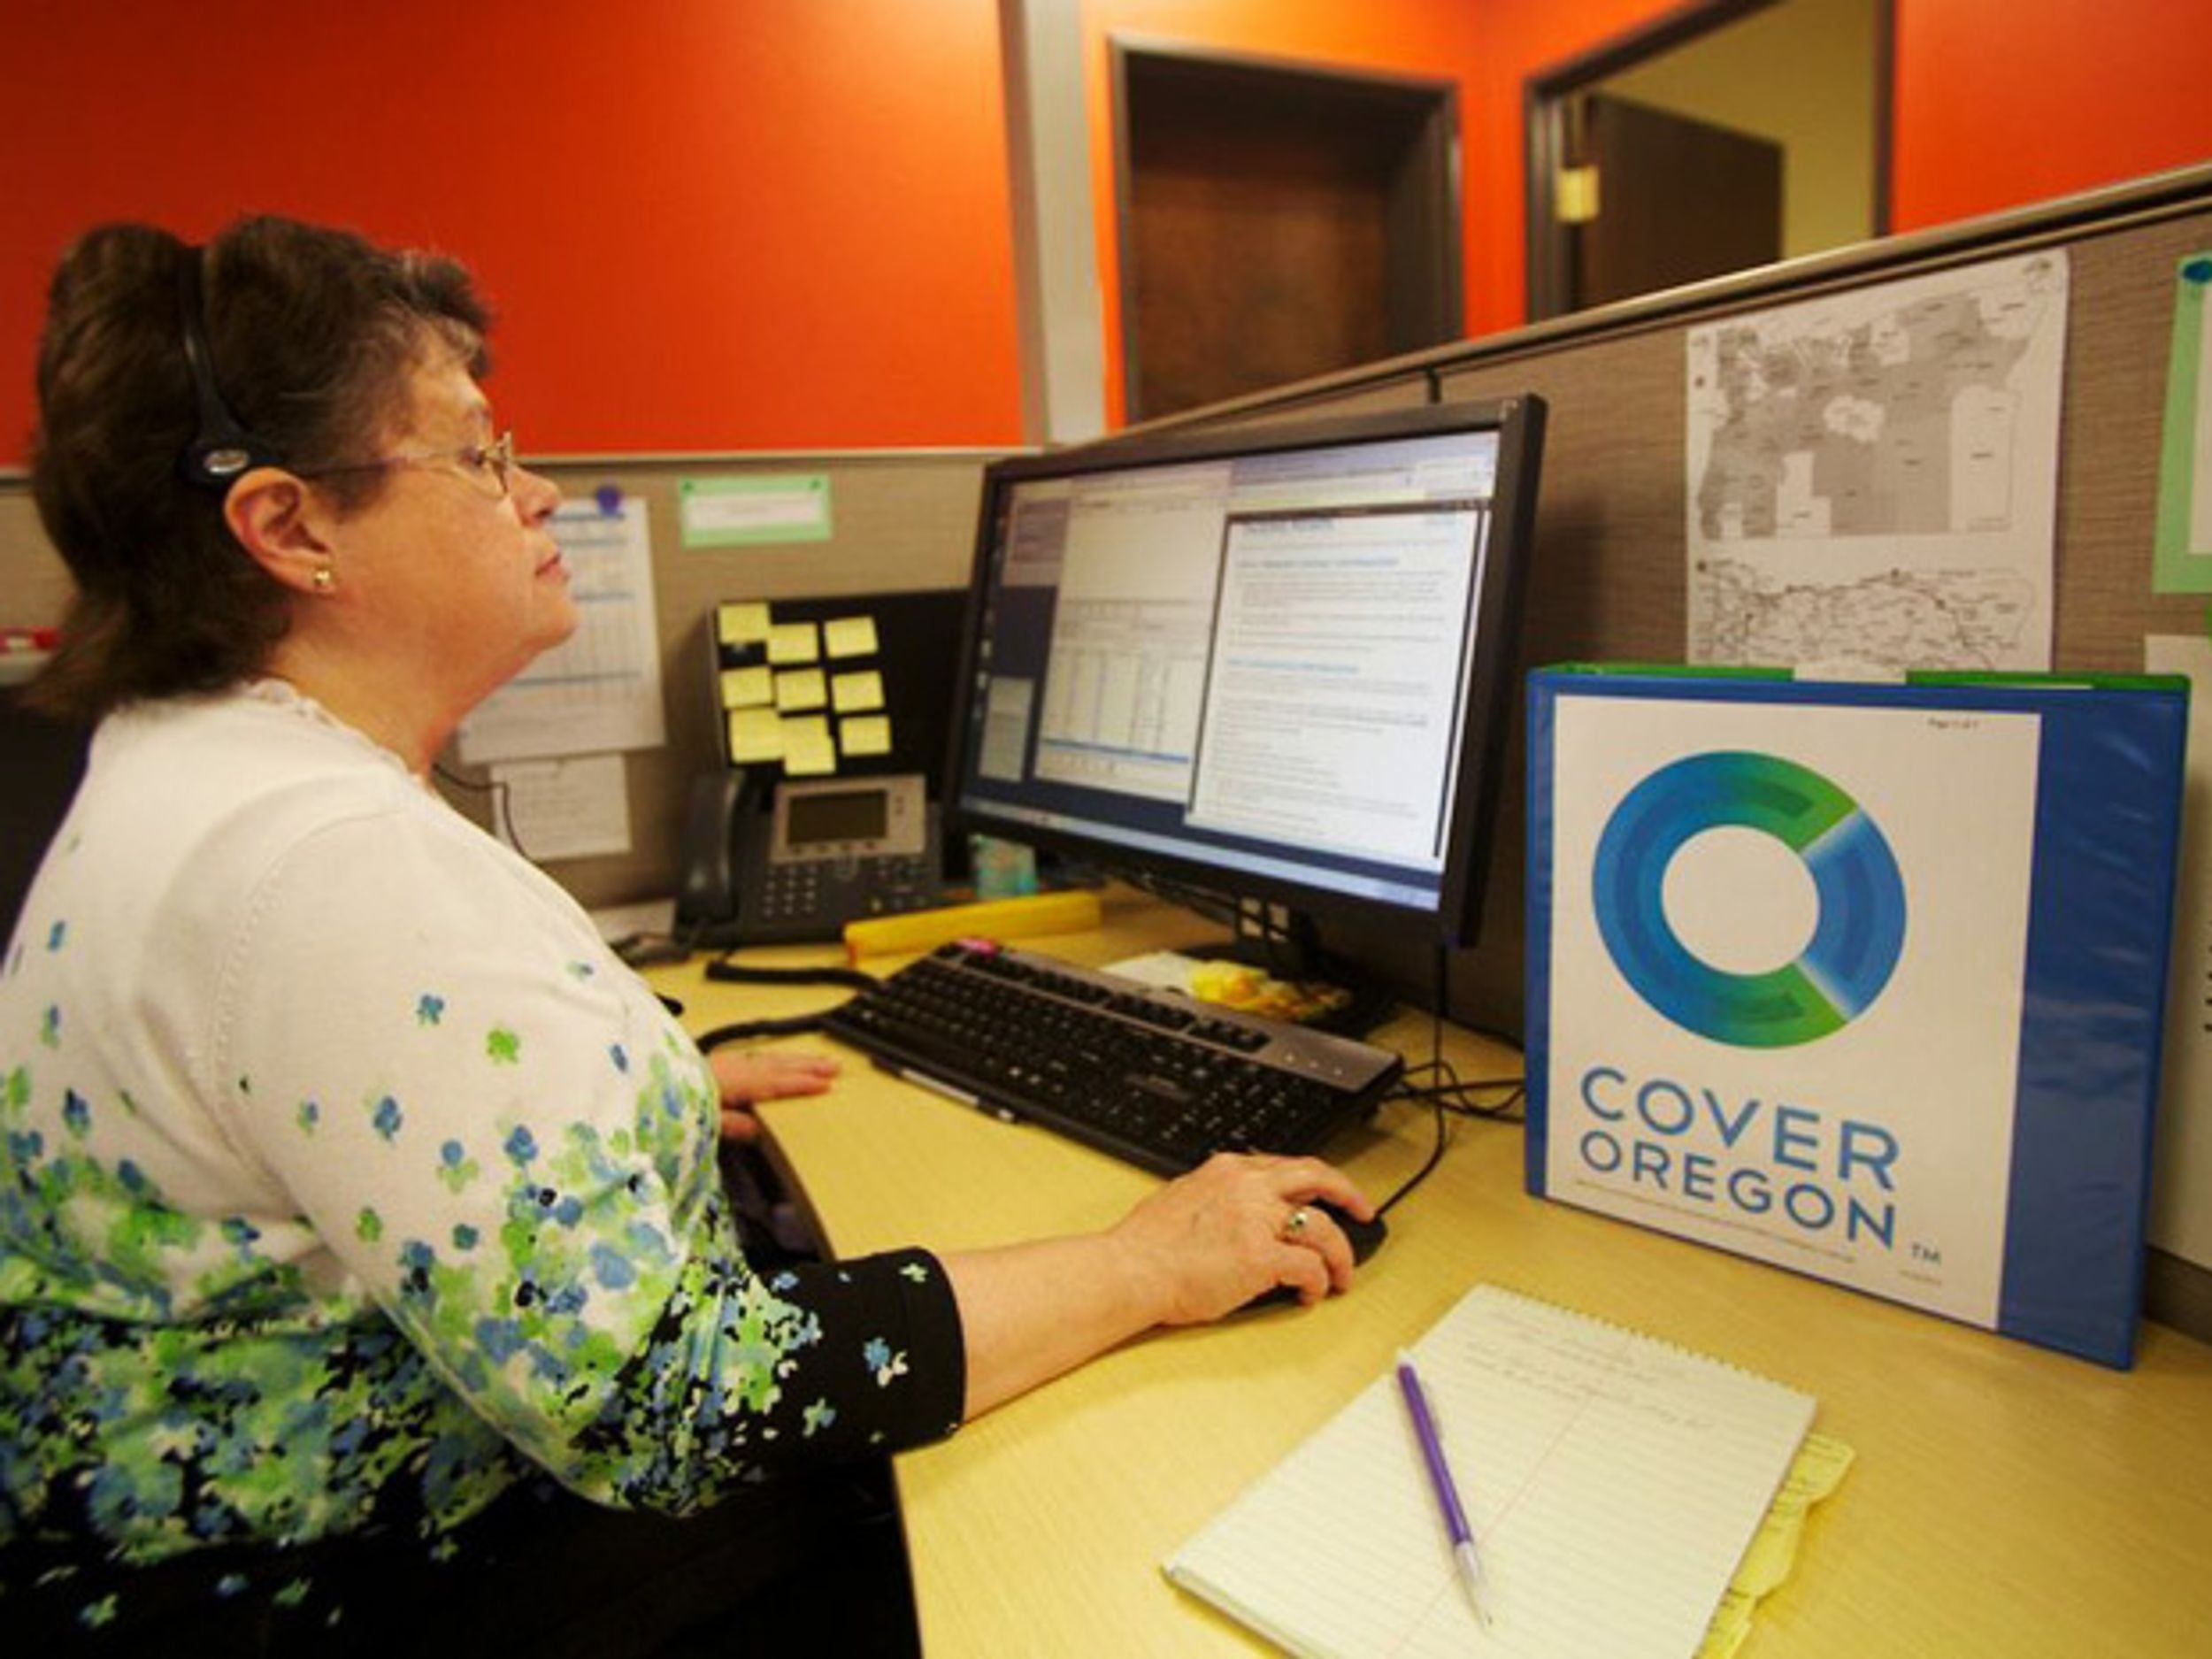 (Un)Cover Oregon: State’s Healthcare Exchange Website Still Inoperable Four Months After Planned Launch